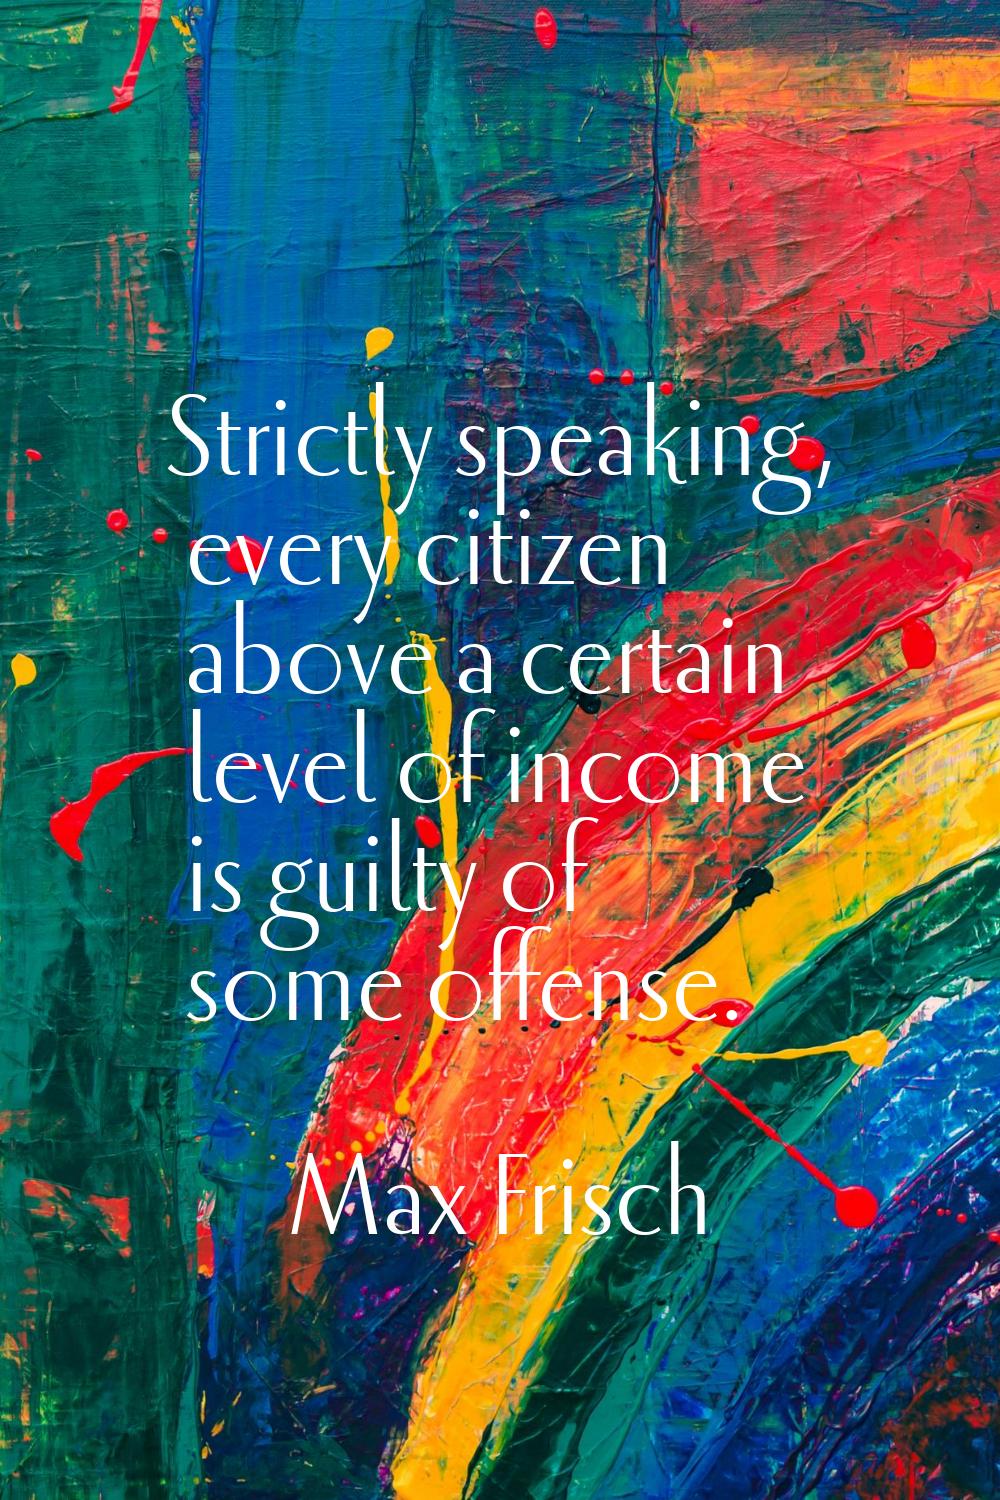 Strictly speaking, every citizen above a certain level of income is guilty of some offense.